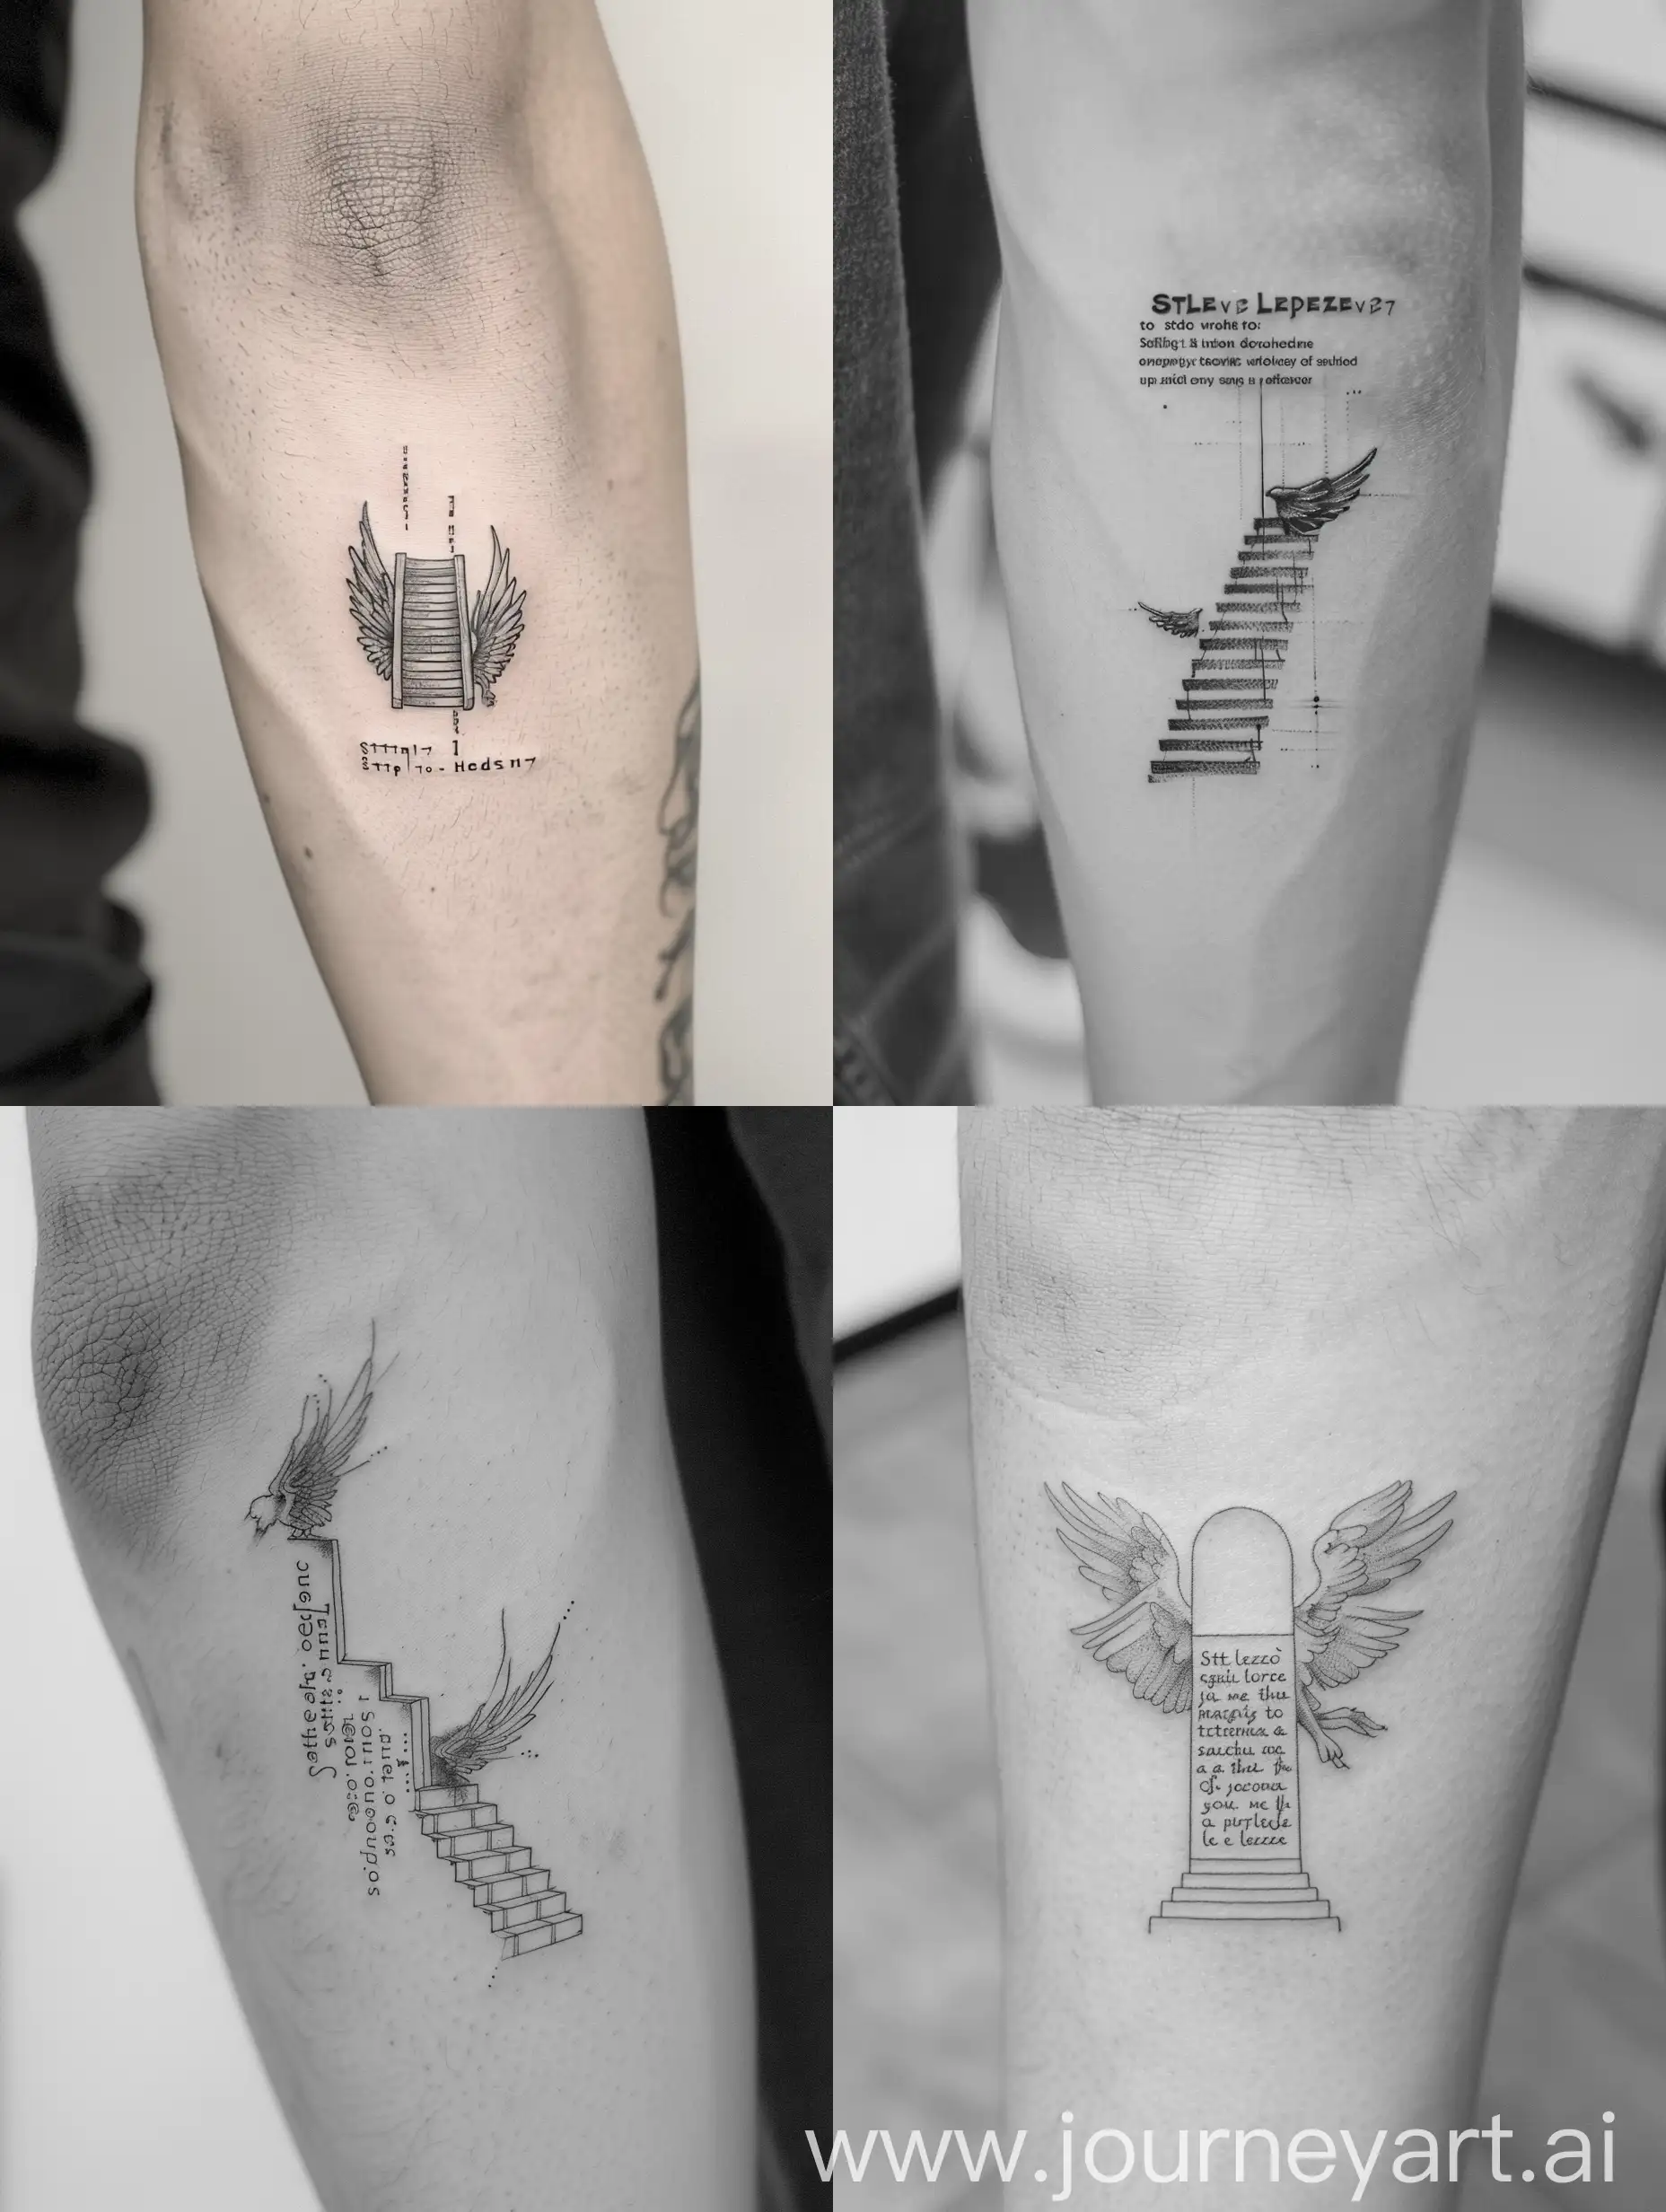 A minimalist tattoo of the Led Zeppelin lyrics "Stairway to Heaven," with a small illustration of a stairway leading up to a pair of wings. The tattoo is done in simple black ink, and the typography is done in a classic font to give it a vintage look.